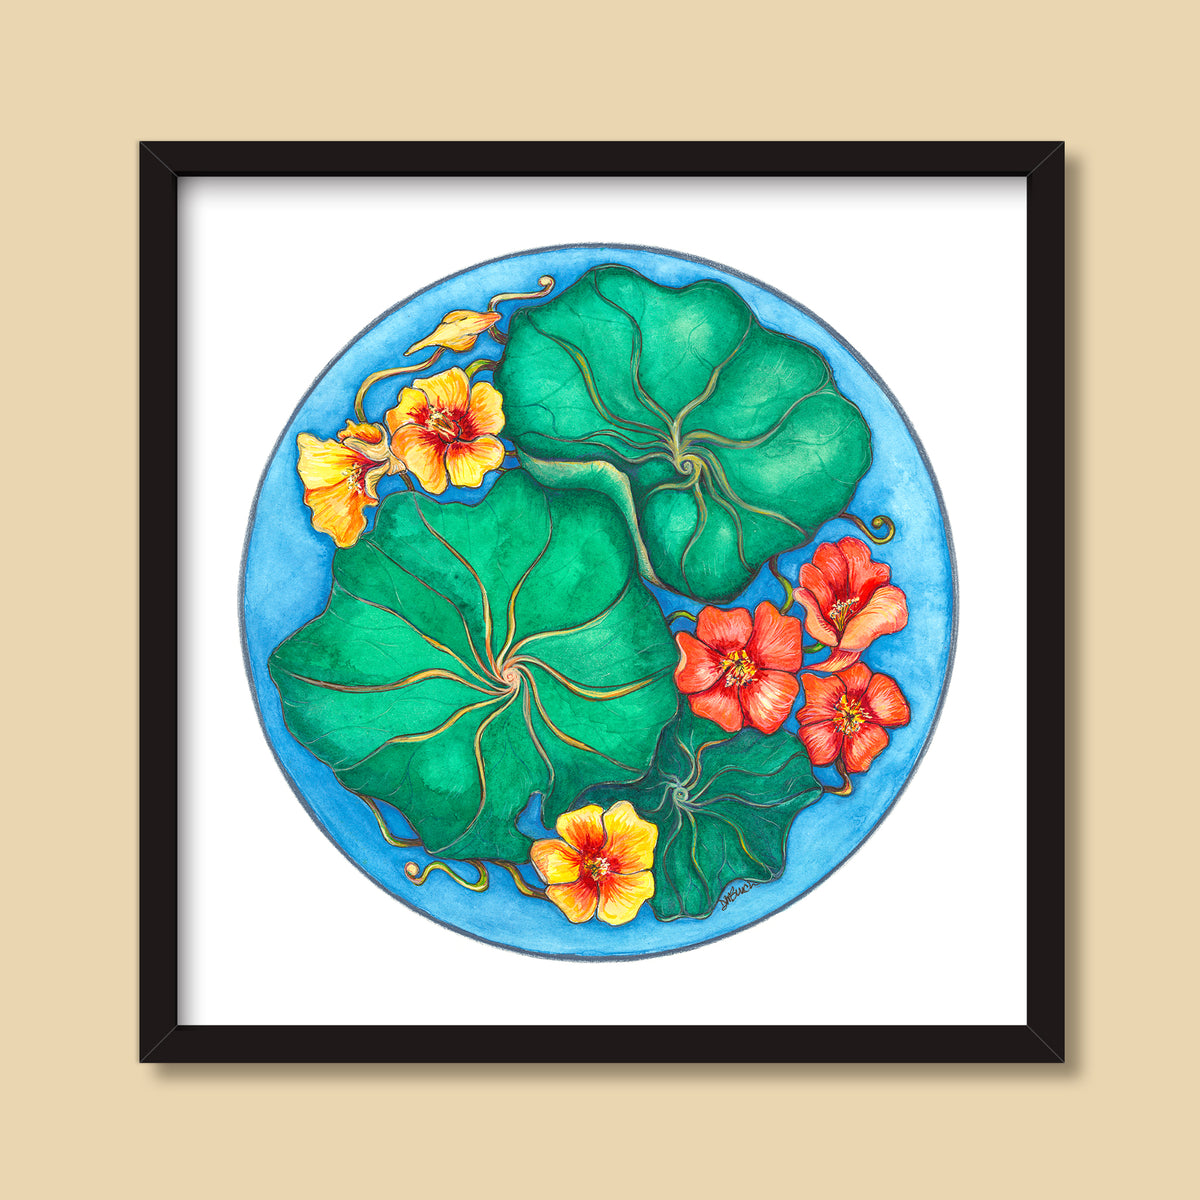 Nasturtiums | Mixed Media Painting by Denise Marta-Burch